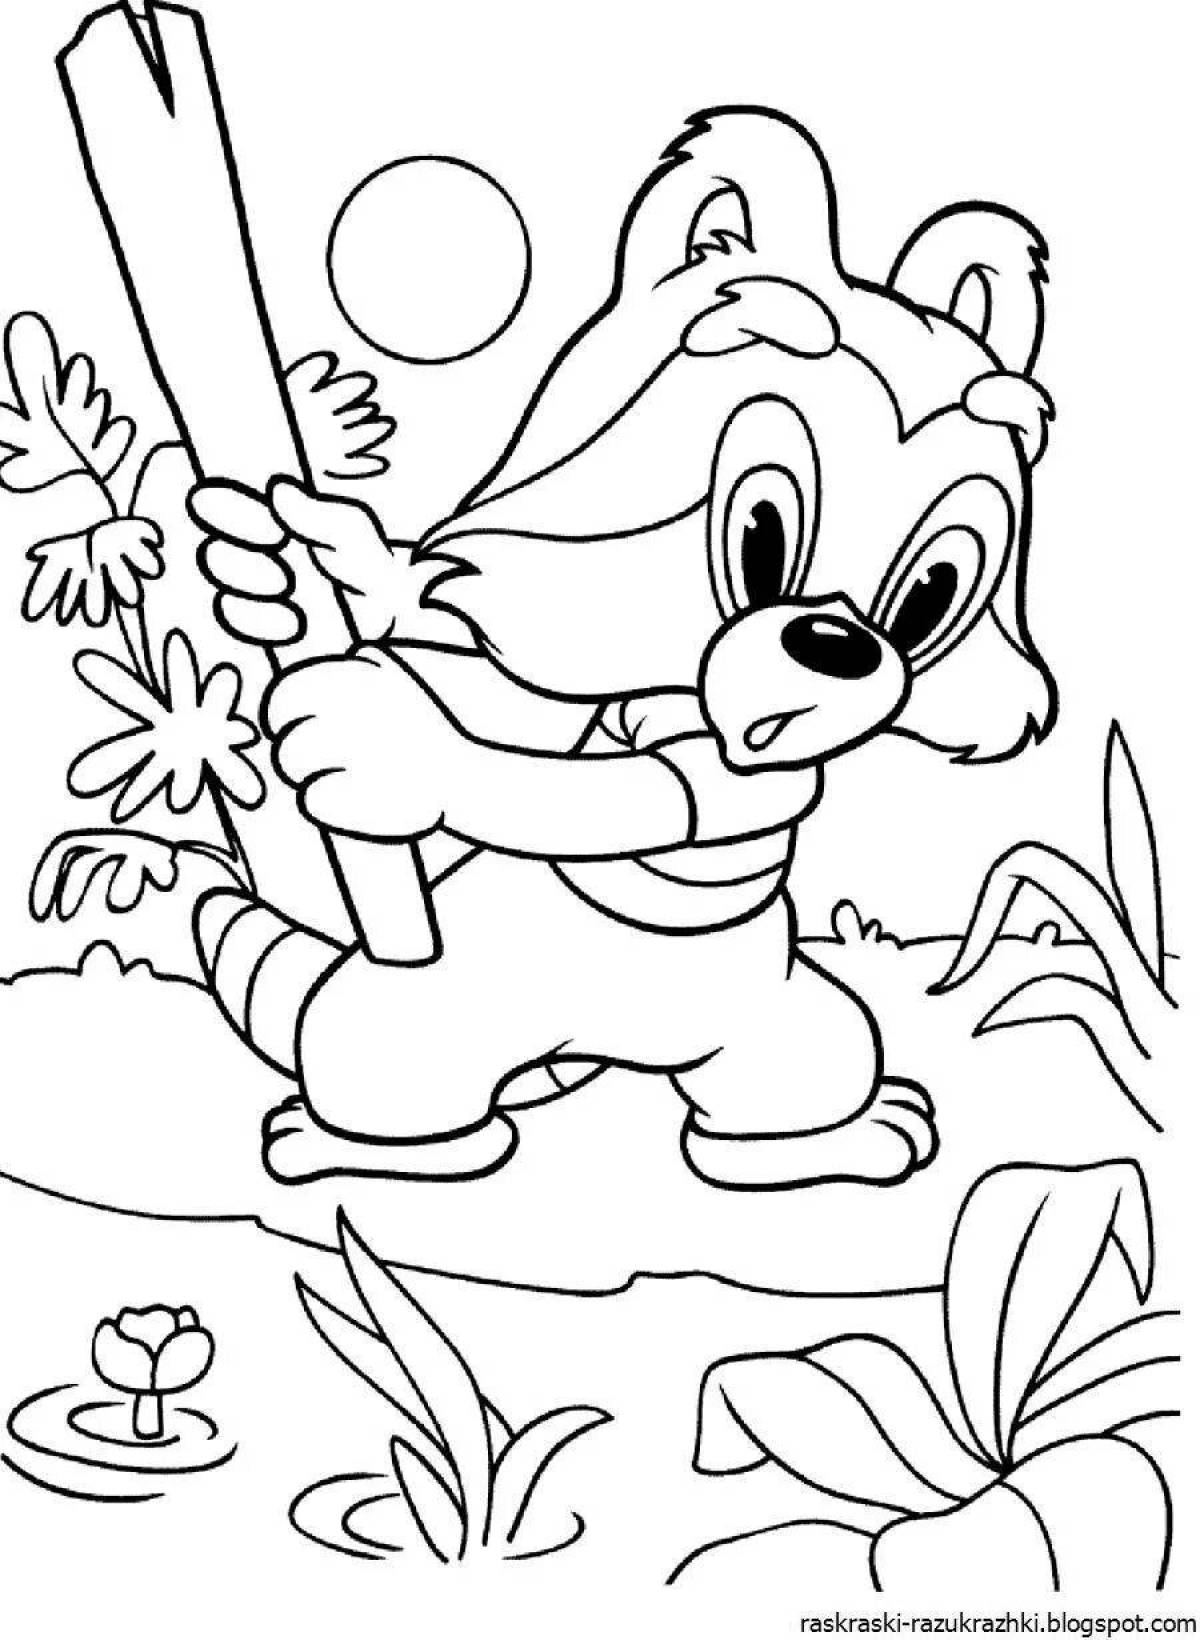 Colored explosion coloring book for 4-5 year old cartoons